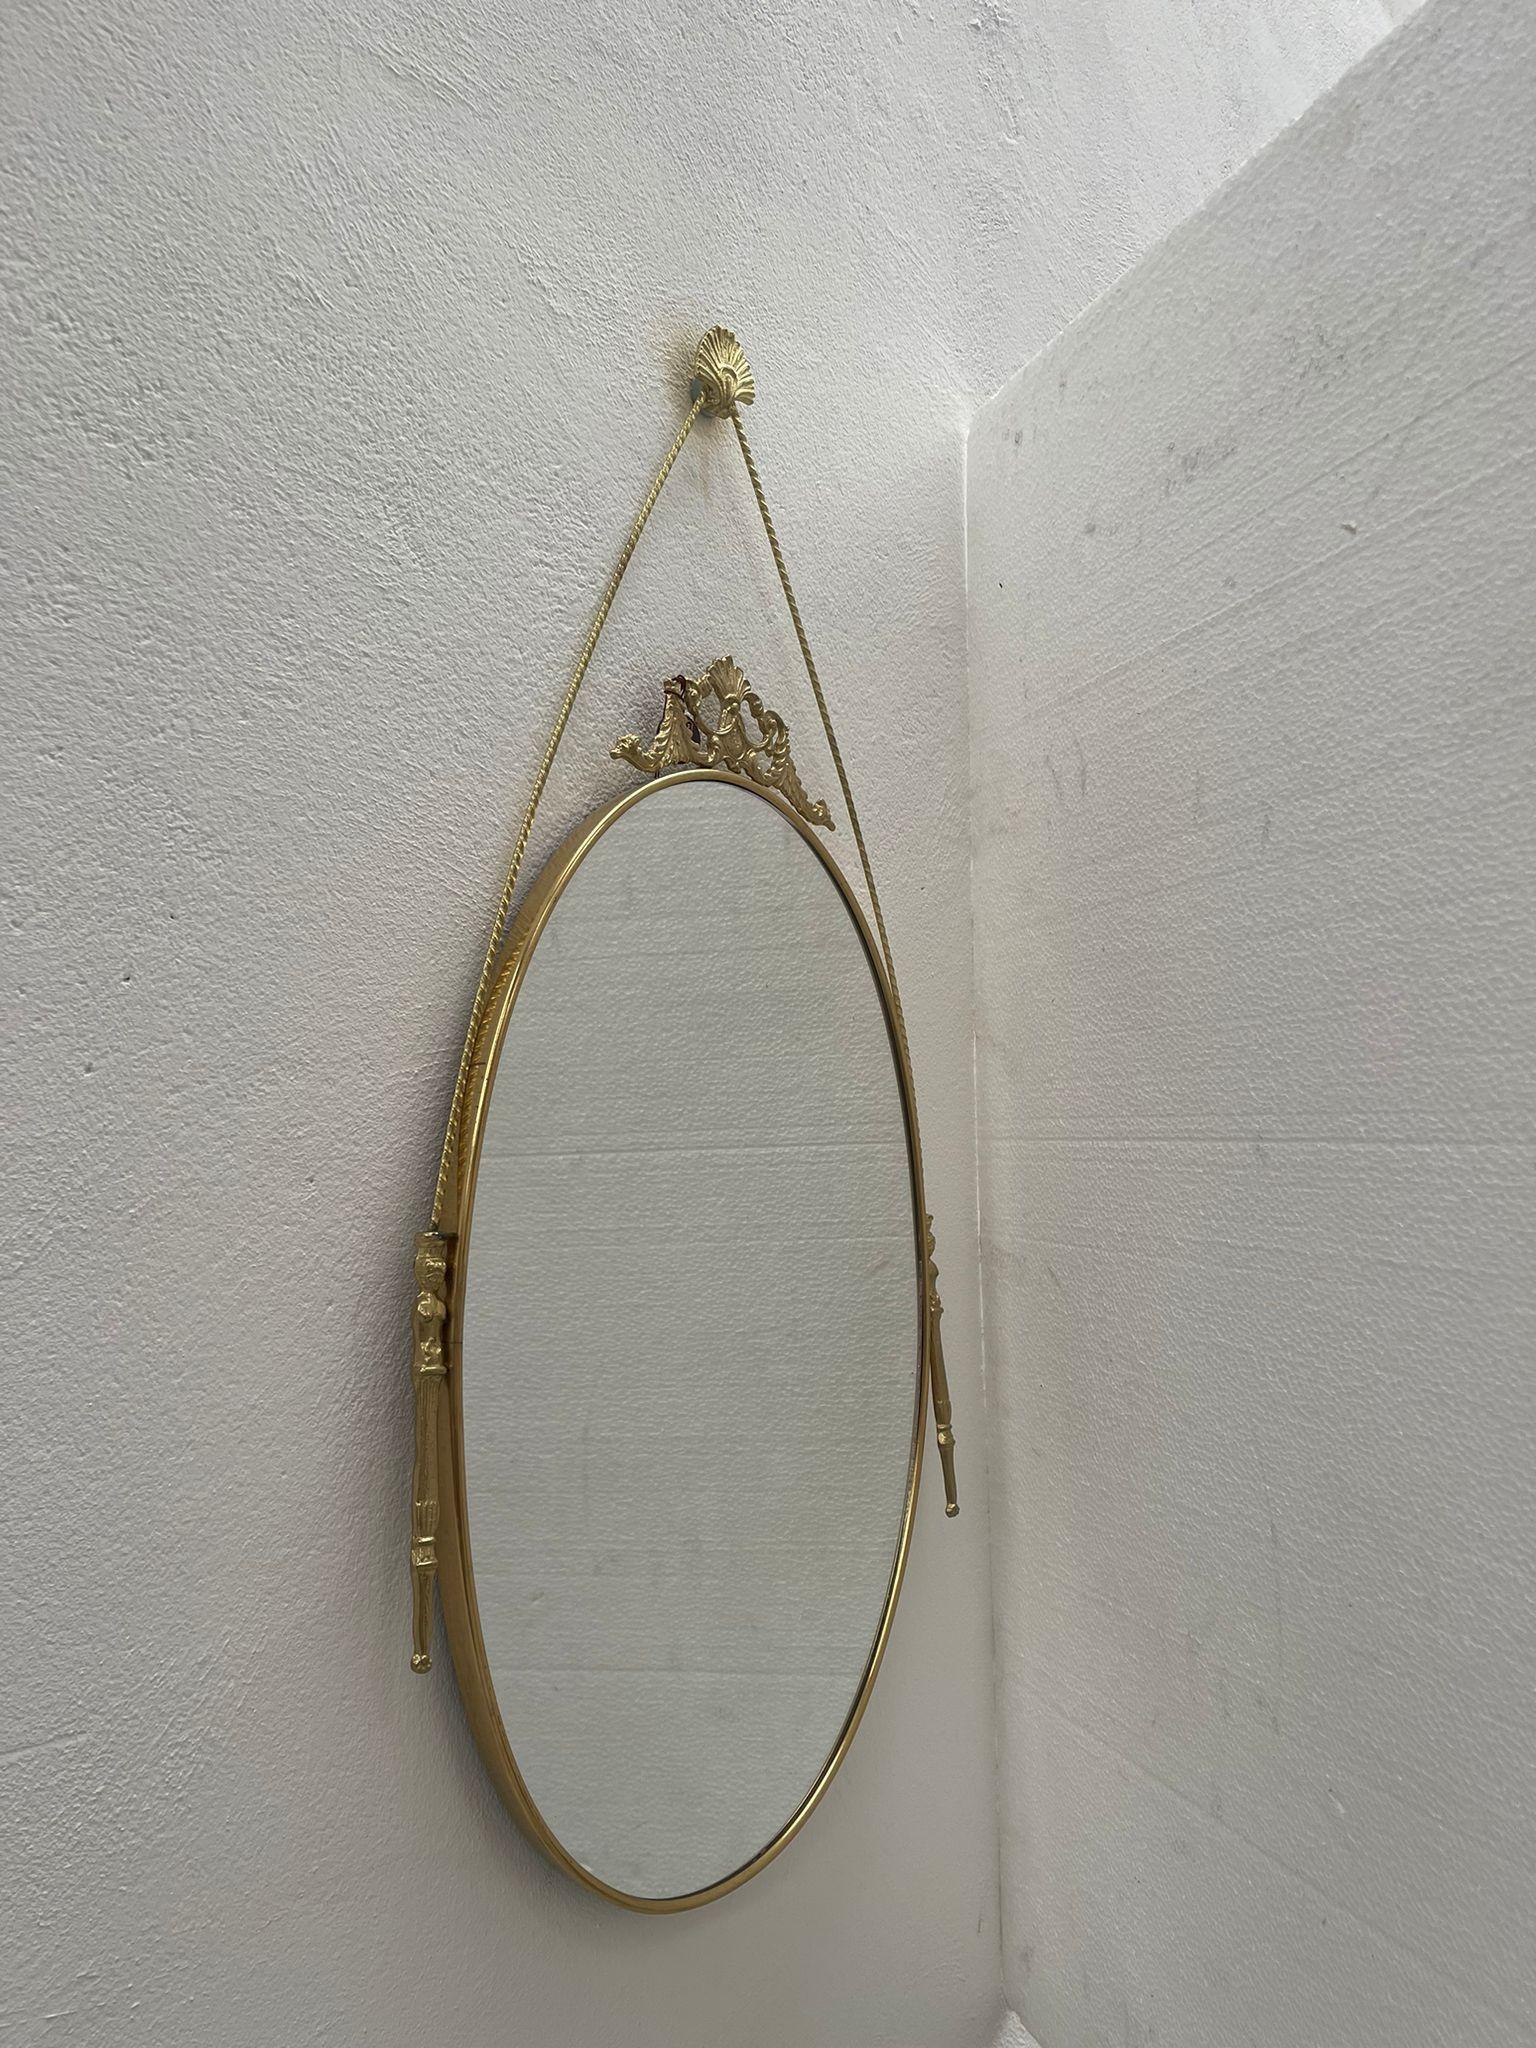 20th Century Brass Wall Mirror In Excellent Condition For Sale In Cantù, IT